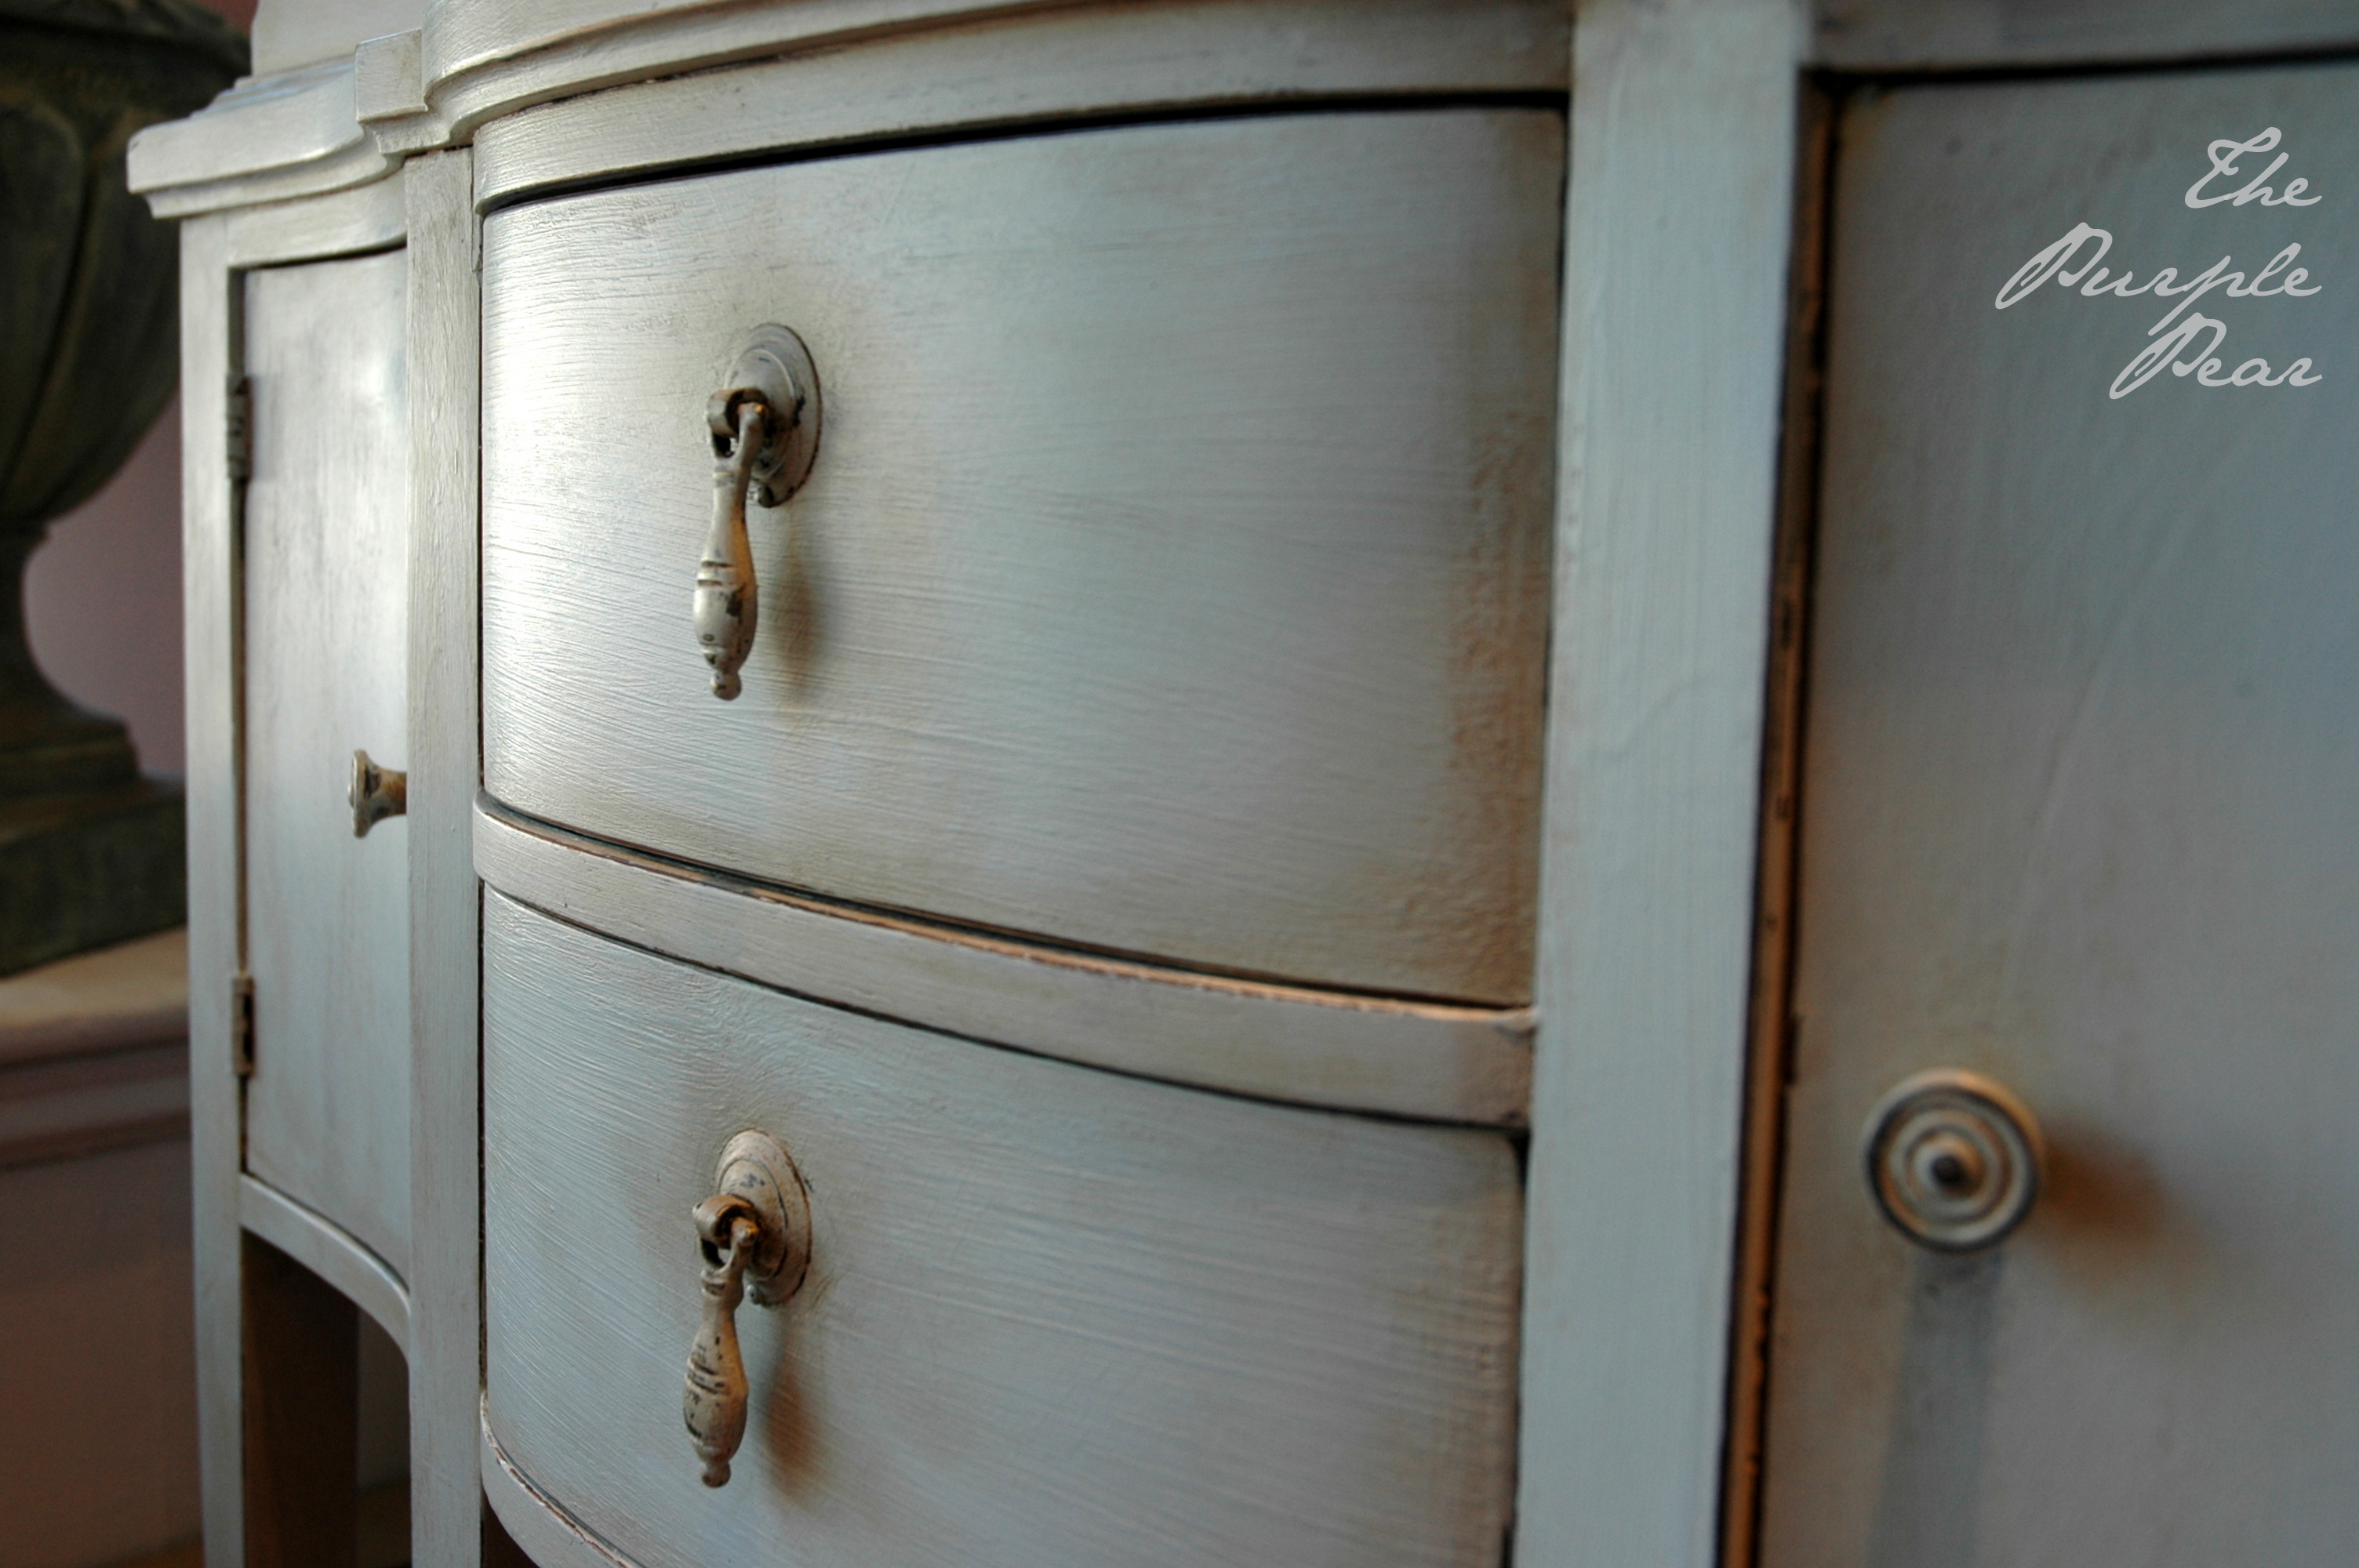 Elegant and Refined, A French Cabinet Destined for Louis Blue